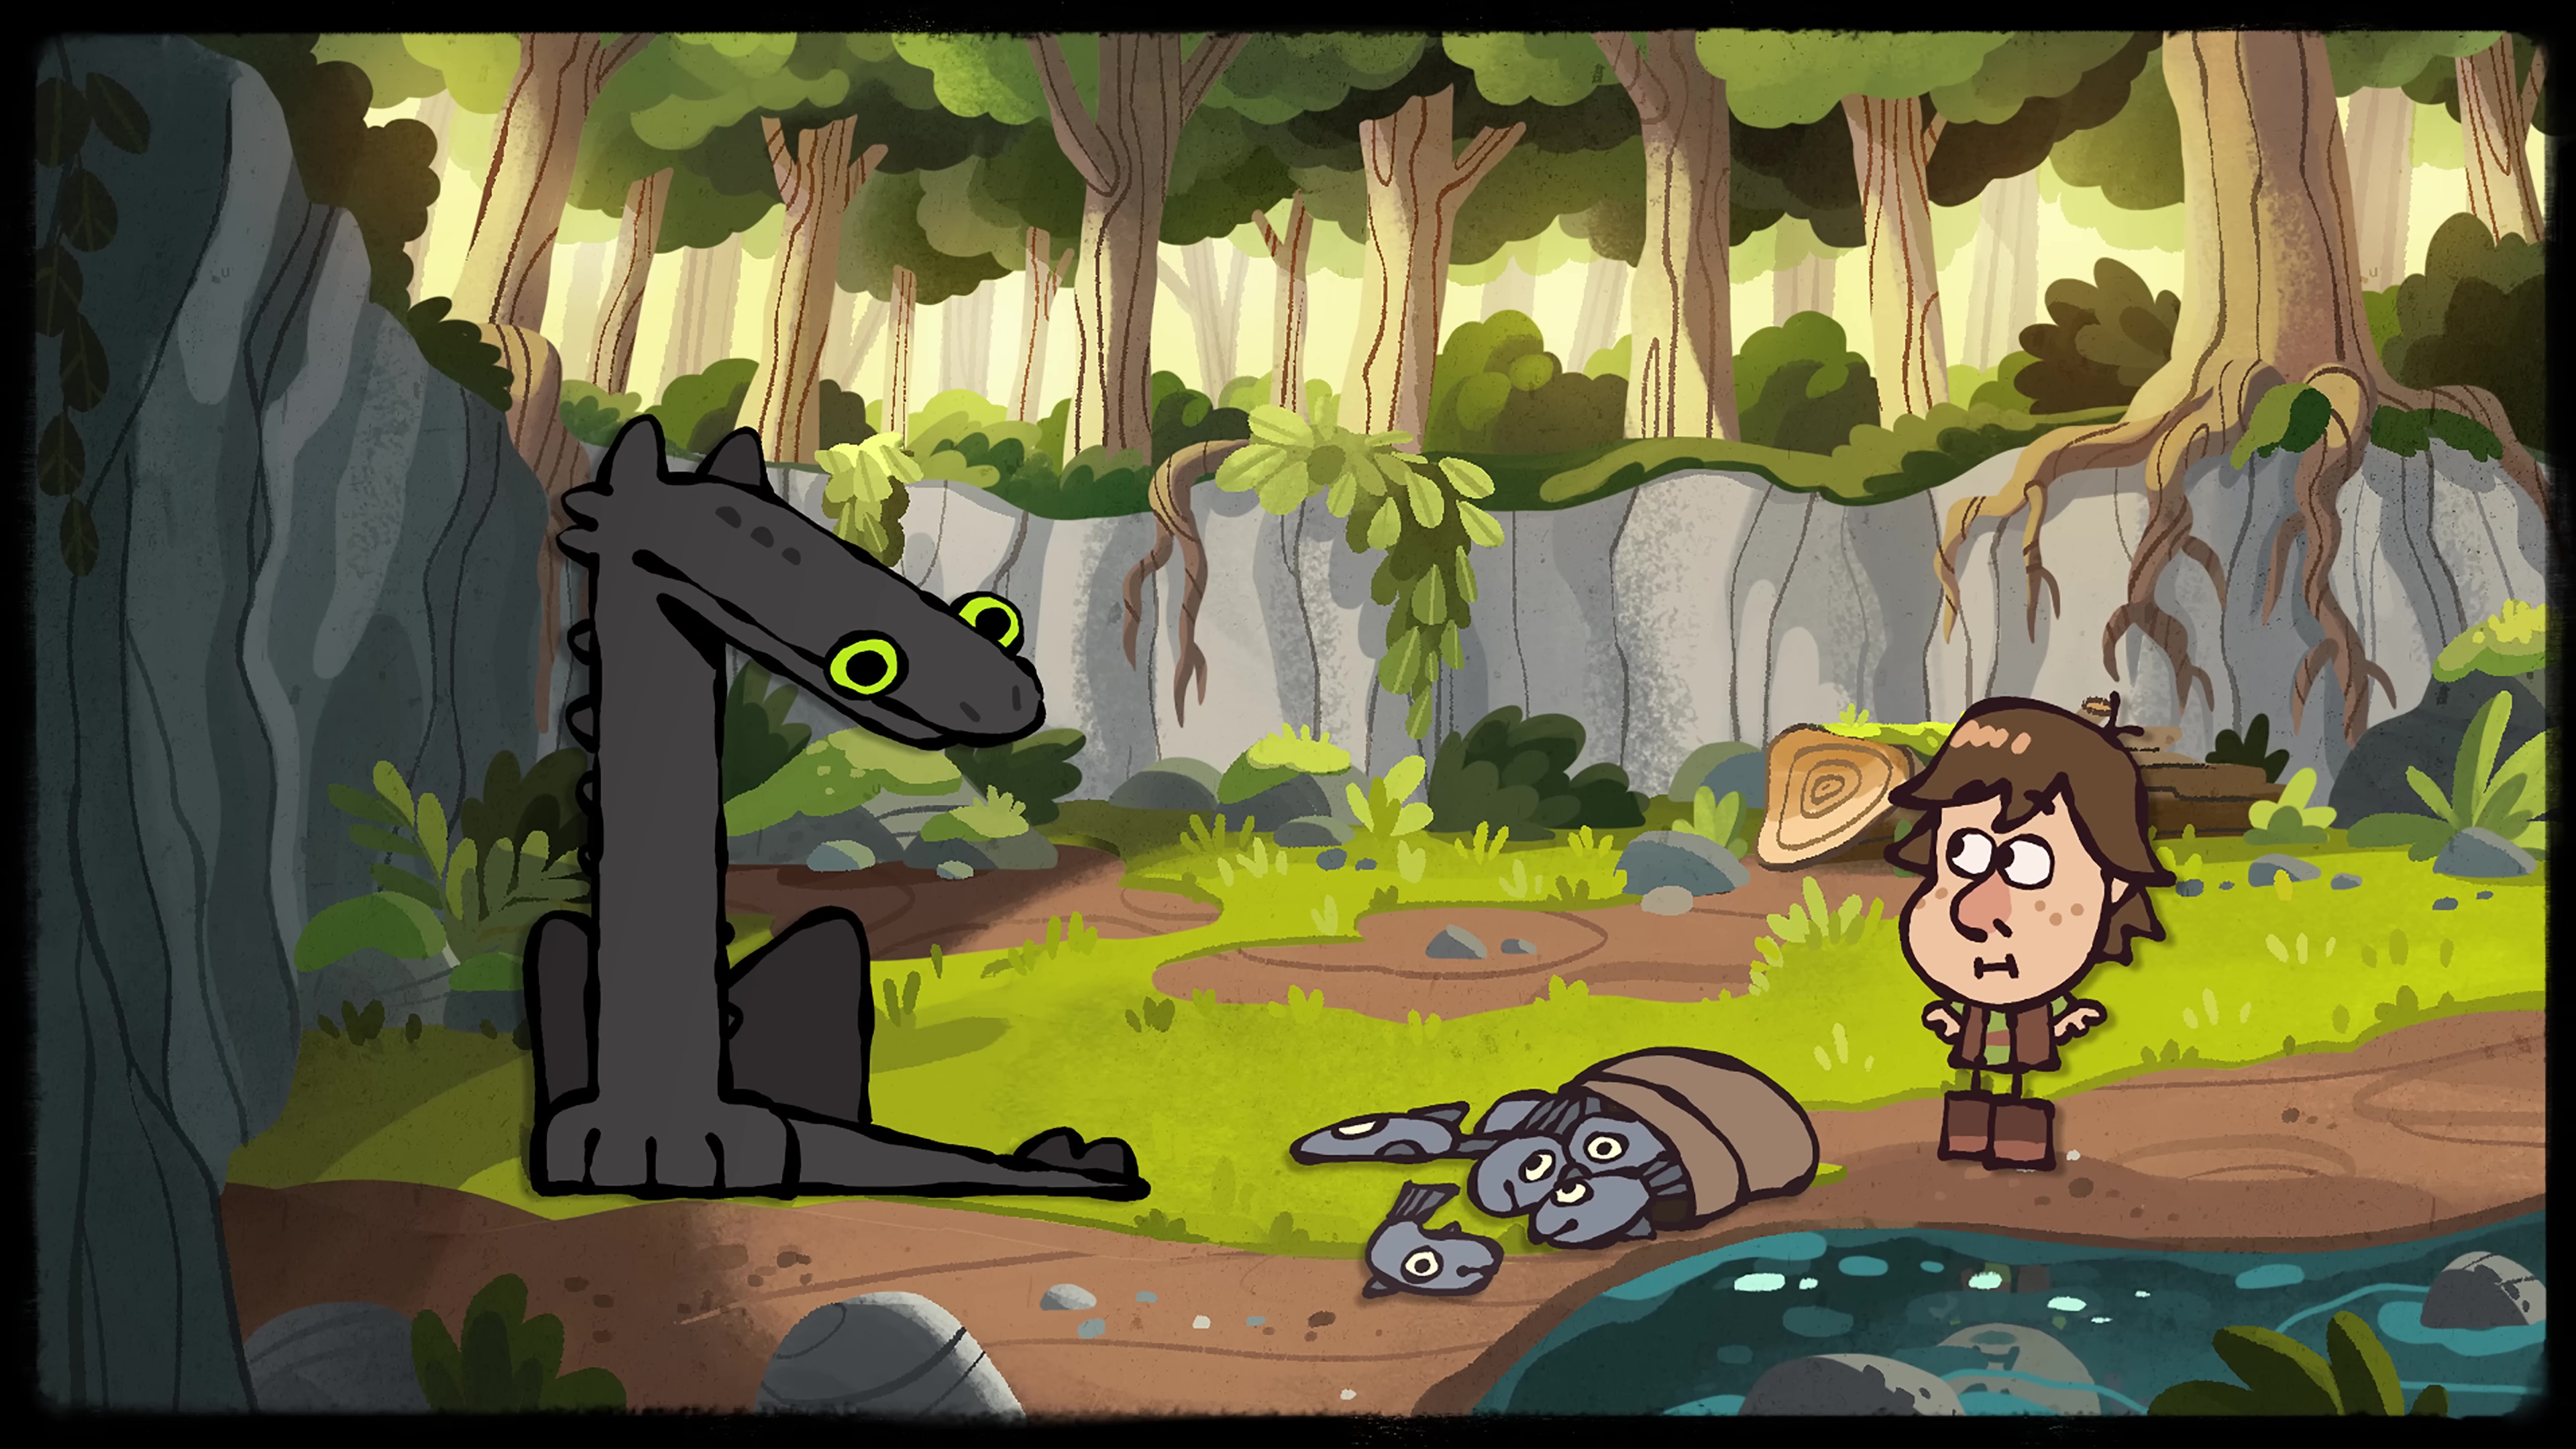 A fan animation depicting Toothless and Hiccup from How To Train Your Dragon. It is drawn with with a pretty simple artstyle where Toothless has big bug eyes and a long, hot dog-shaped body.